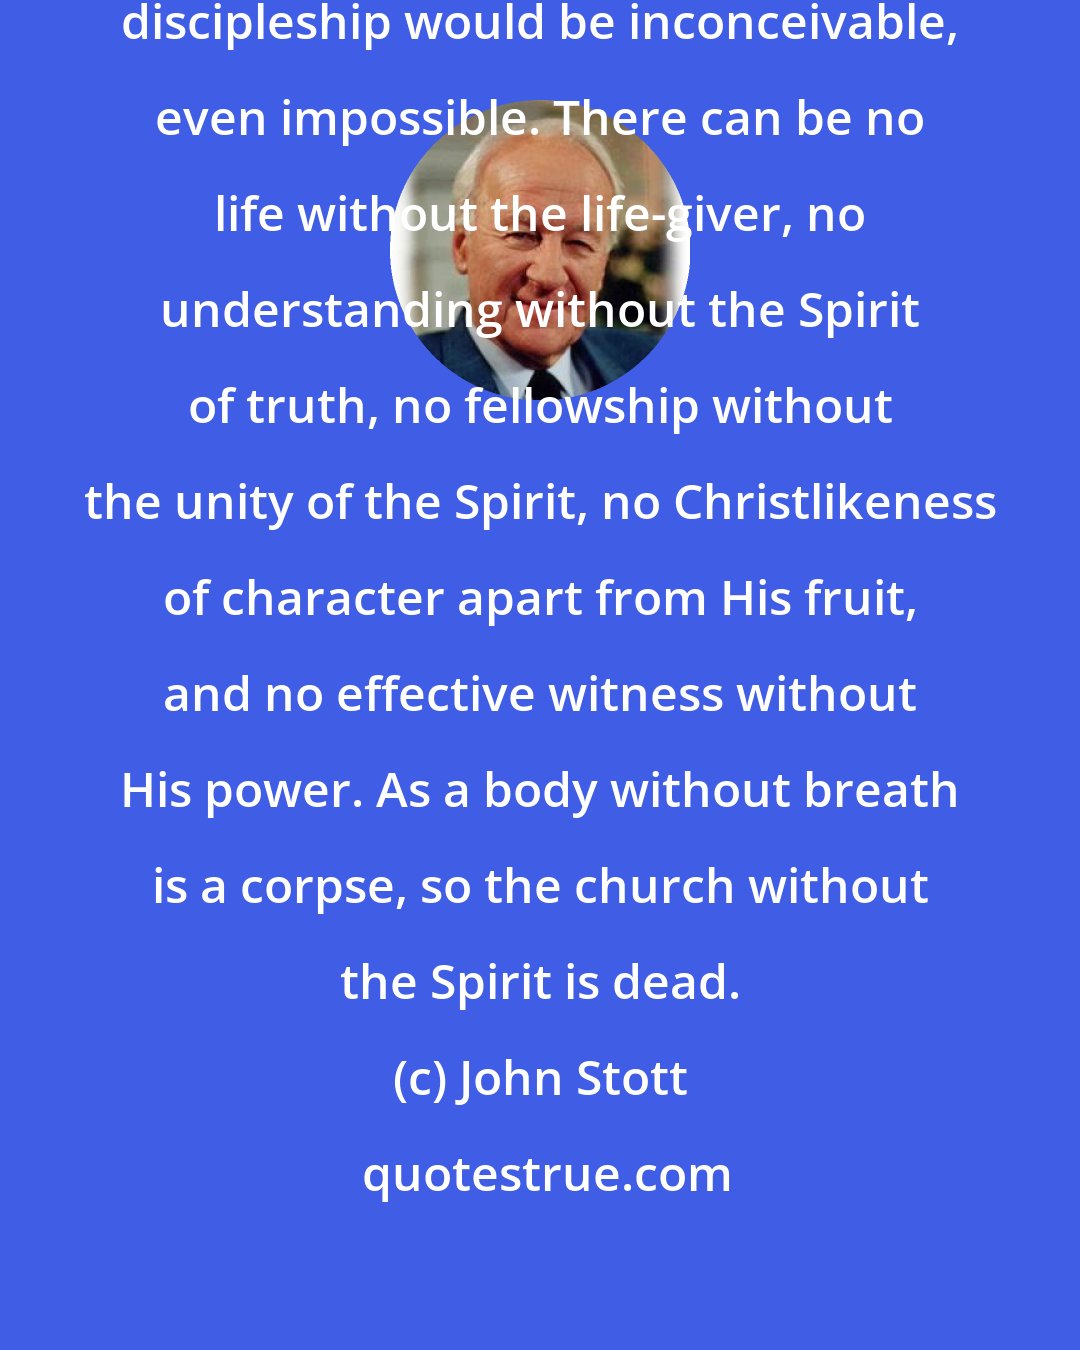 John Stott: Without the Holy Spirit, Christian discipleship would be inconceivable, even impossible. There can be no life without the life-giver, no understanding without the Spirit of truth, no fellowship without the unity of the Spirit, no Christlikeness of character apart from His fruit, and no effective witness without His power. As a body without breath is a corpse, so the church without the Spirit is dead.